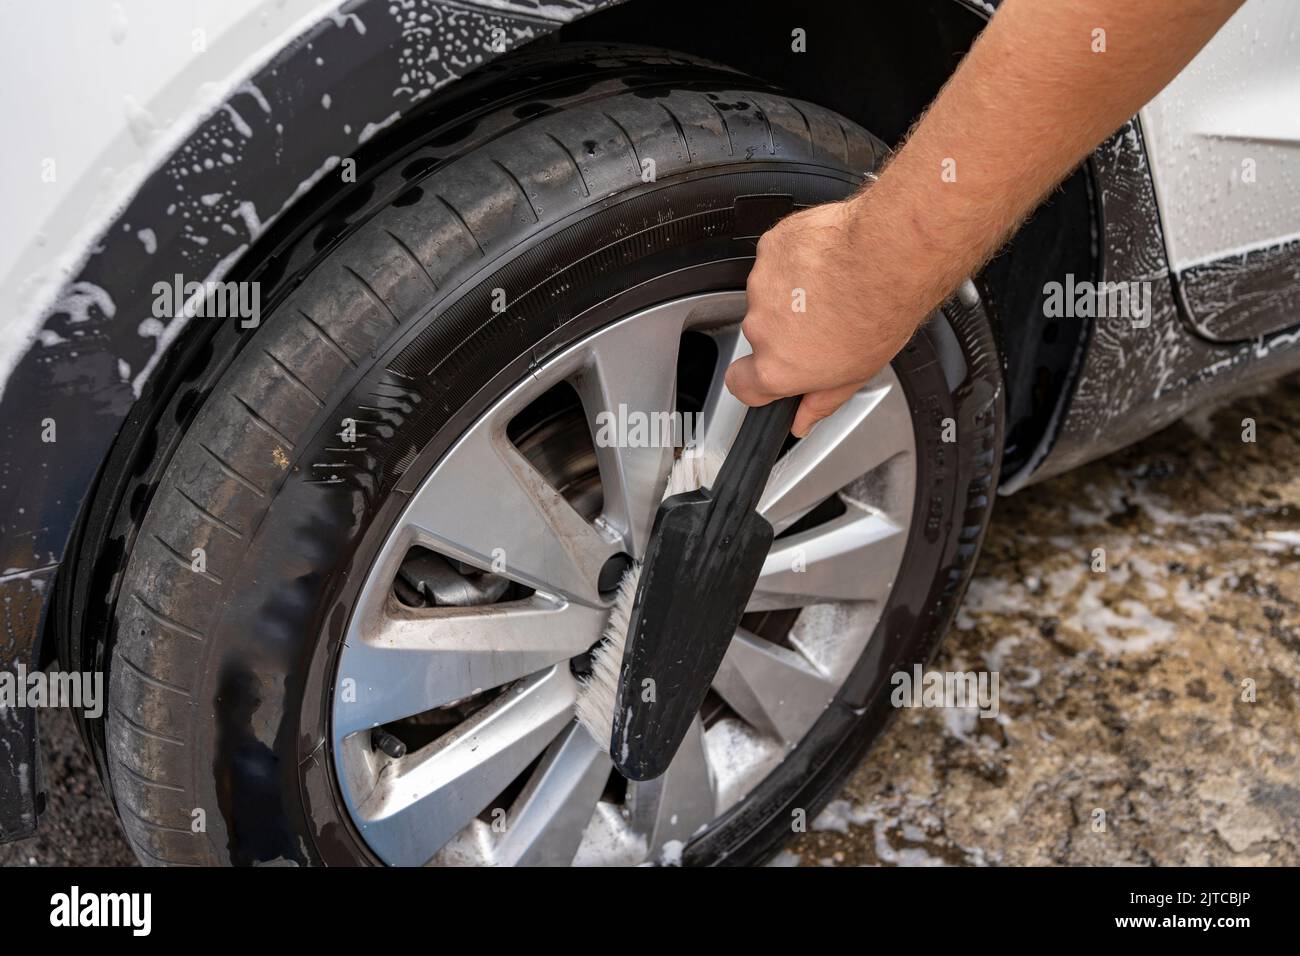 man's hand cleaning the rims of a car with a brush Stock Photo